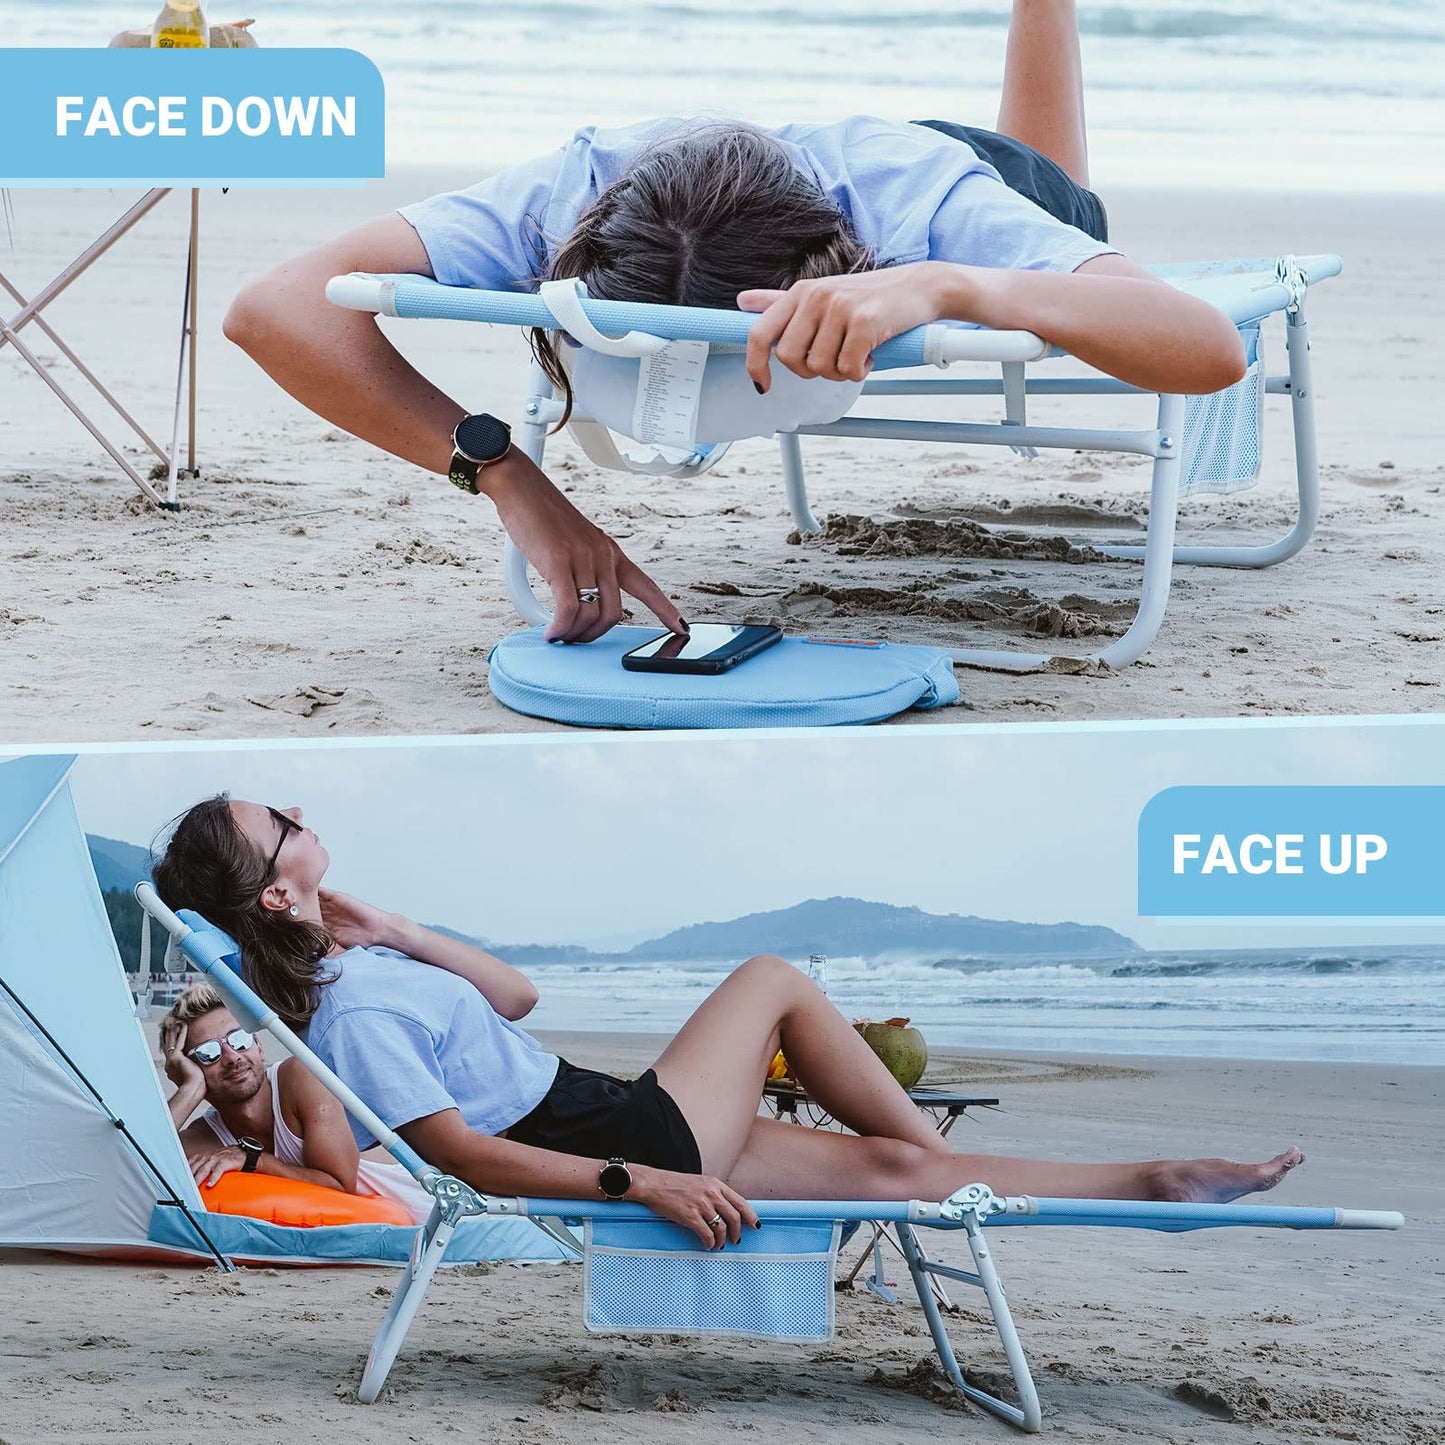 WEJOY 2 Pack Adjustable Tanning Sunbathing Lounge Chair With Face Down Hole